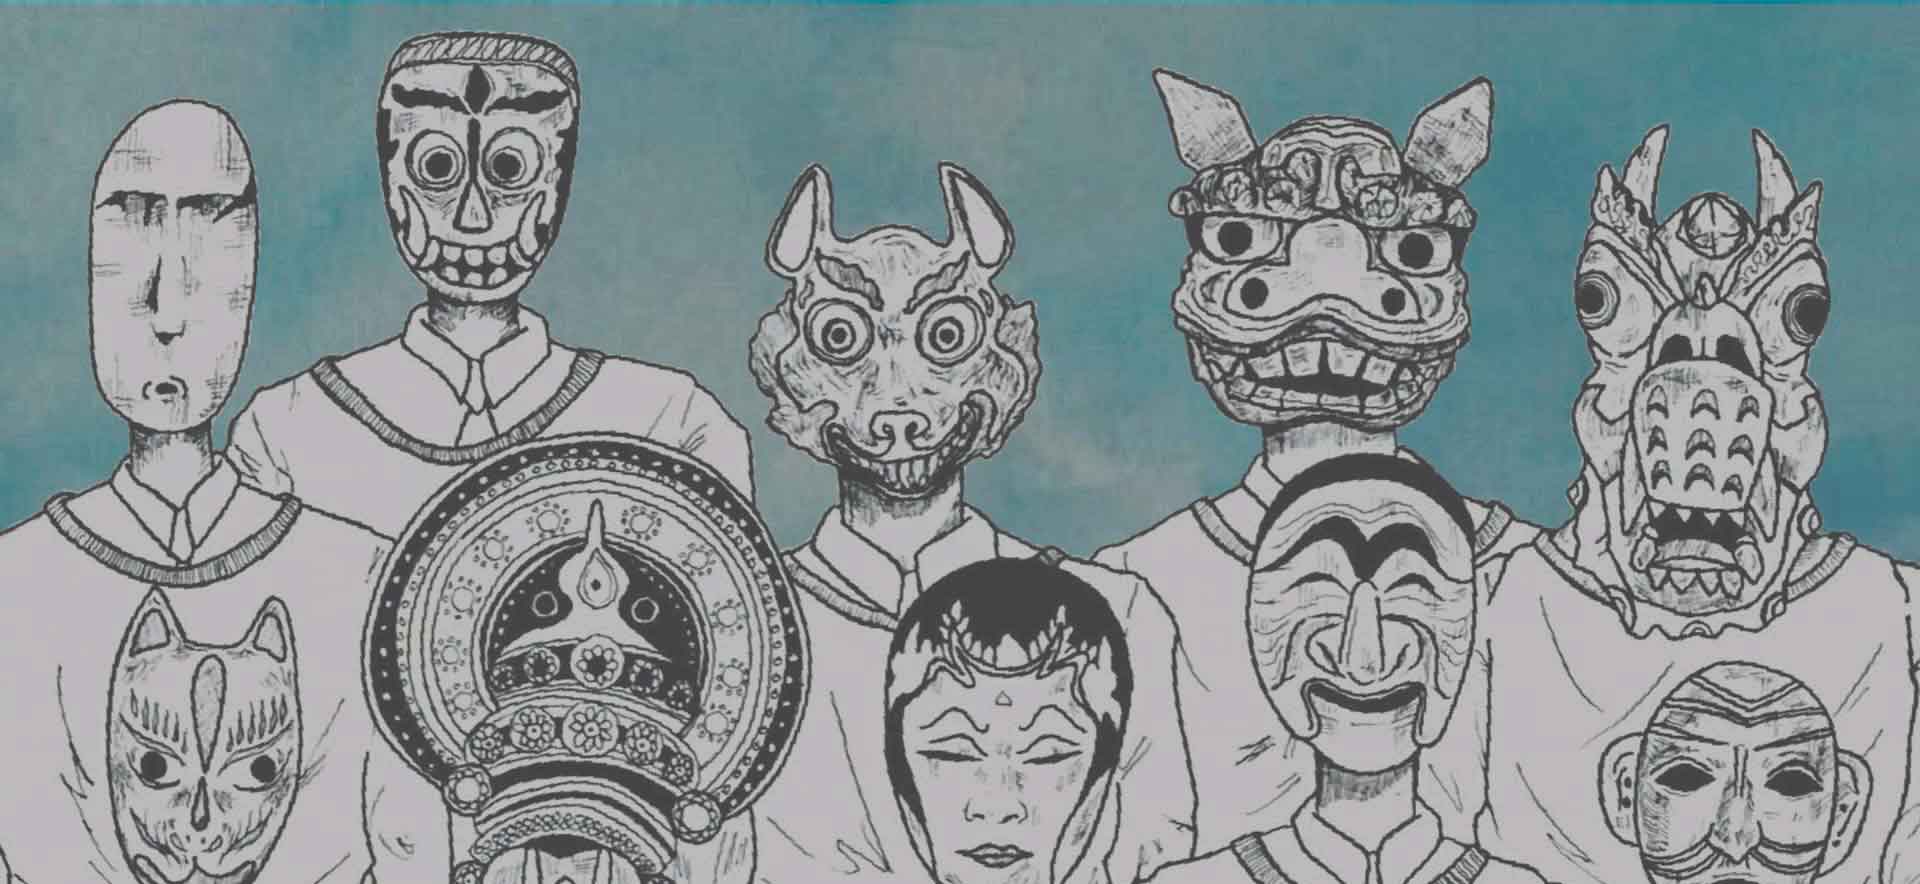 Illustration of individuals wearing different masks